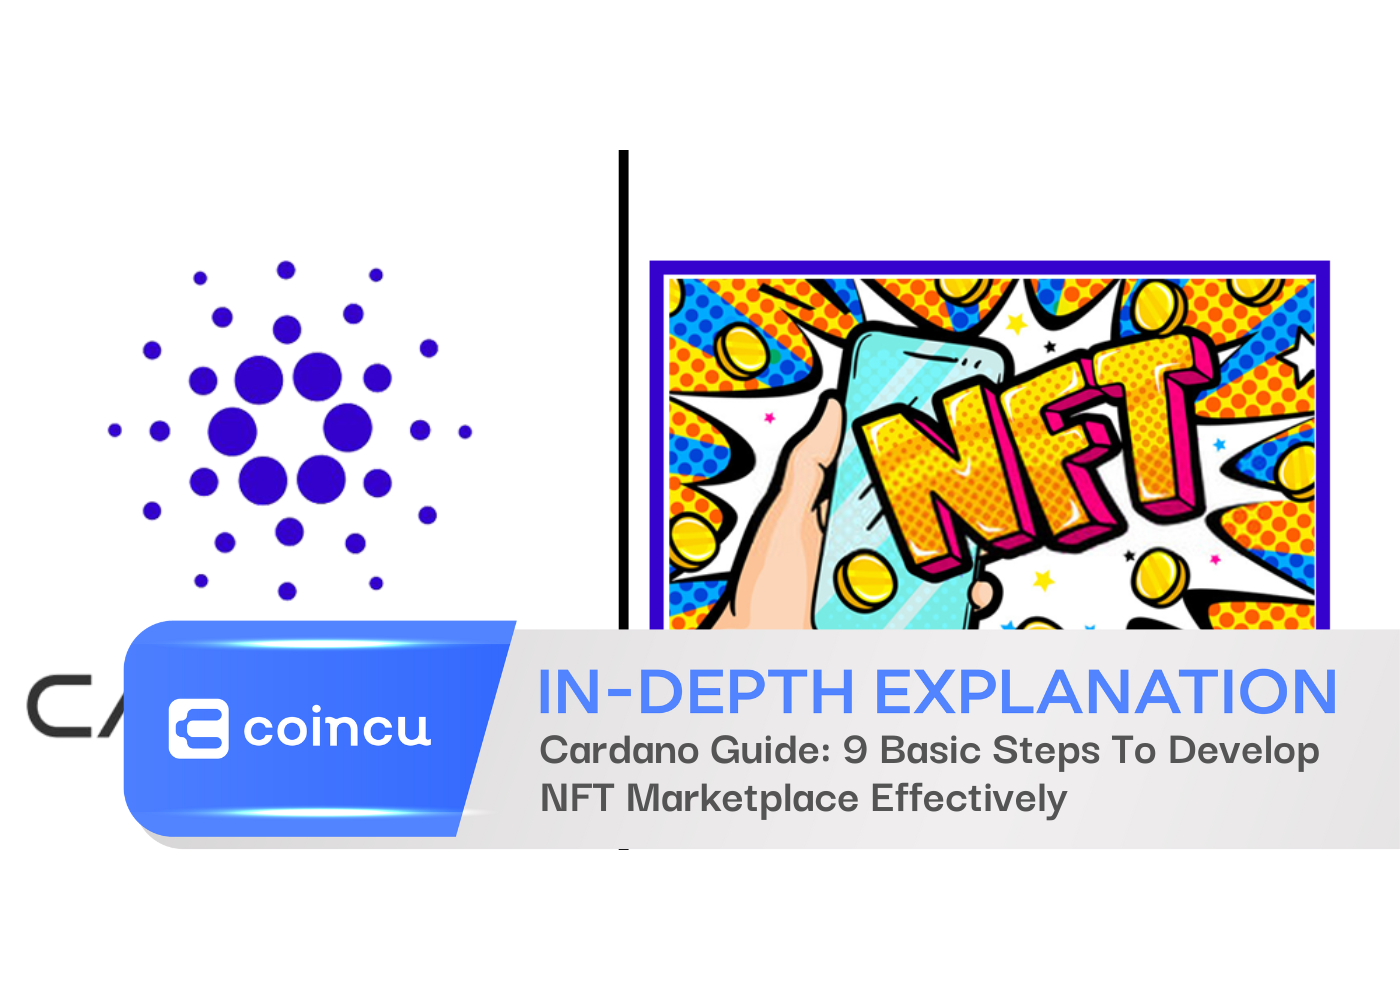 Cardano Guide: 9 Basic Steps To Develop NFT Marketplace Effectively